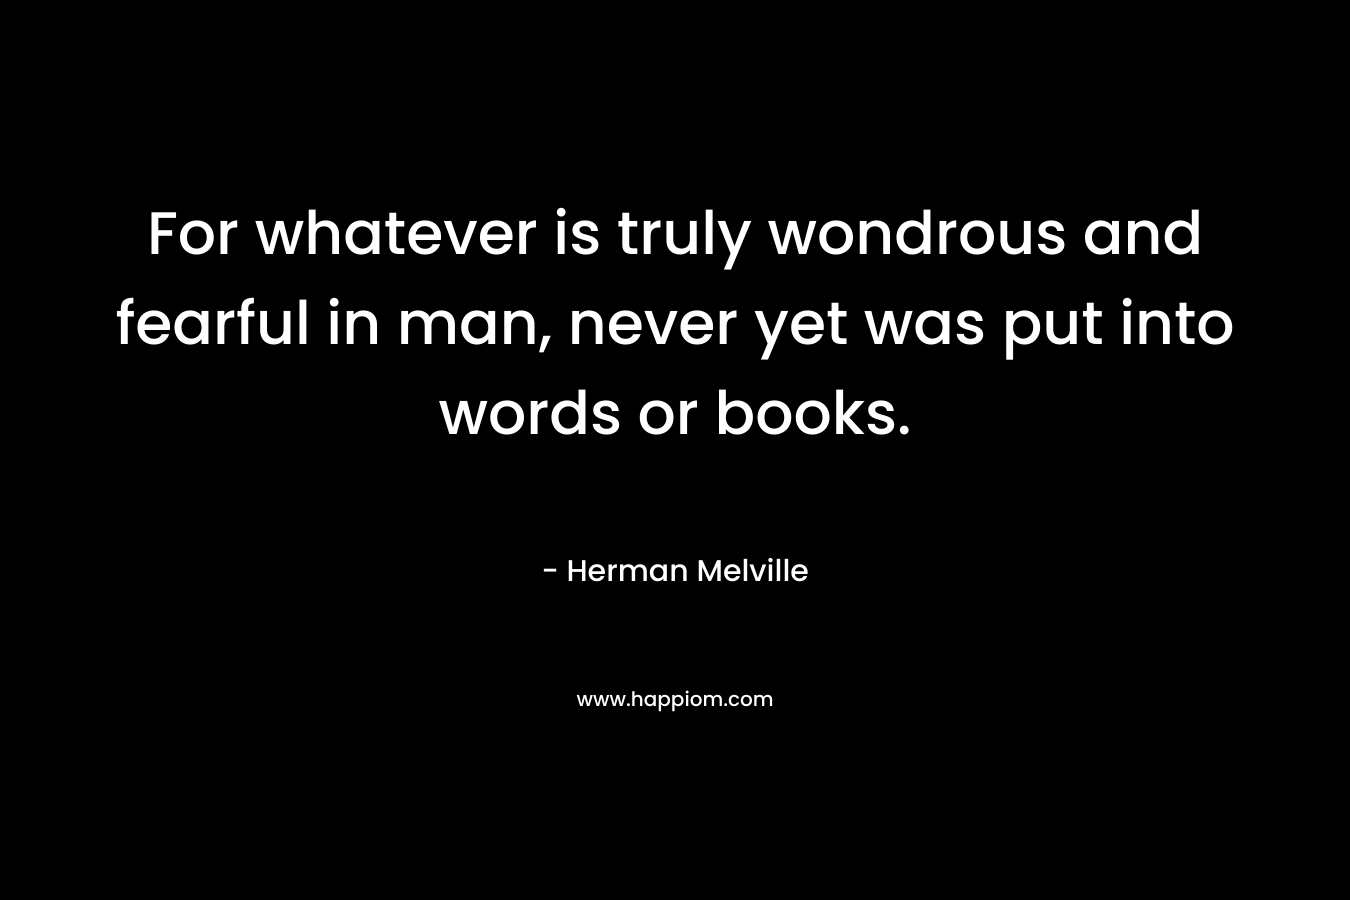 For whatever is truly wondrous and fearful in man, never yet was put into words or books. – Herman Melville